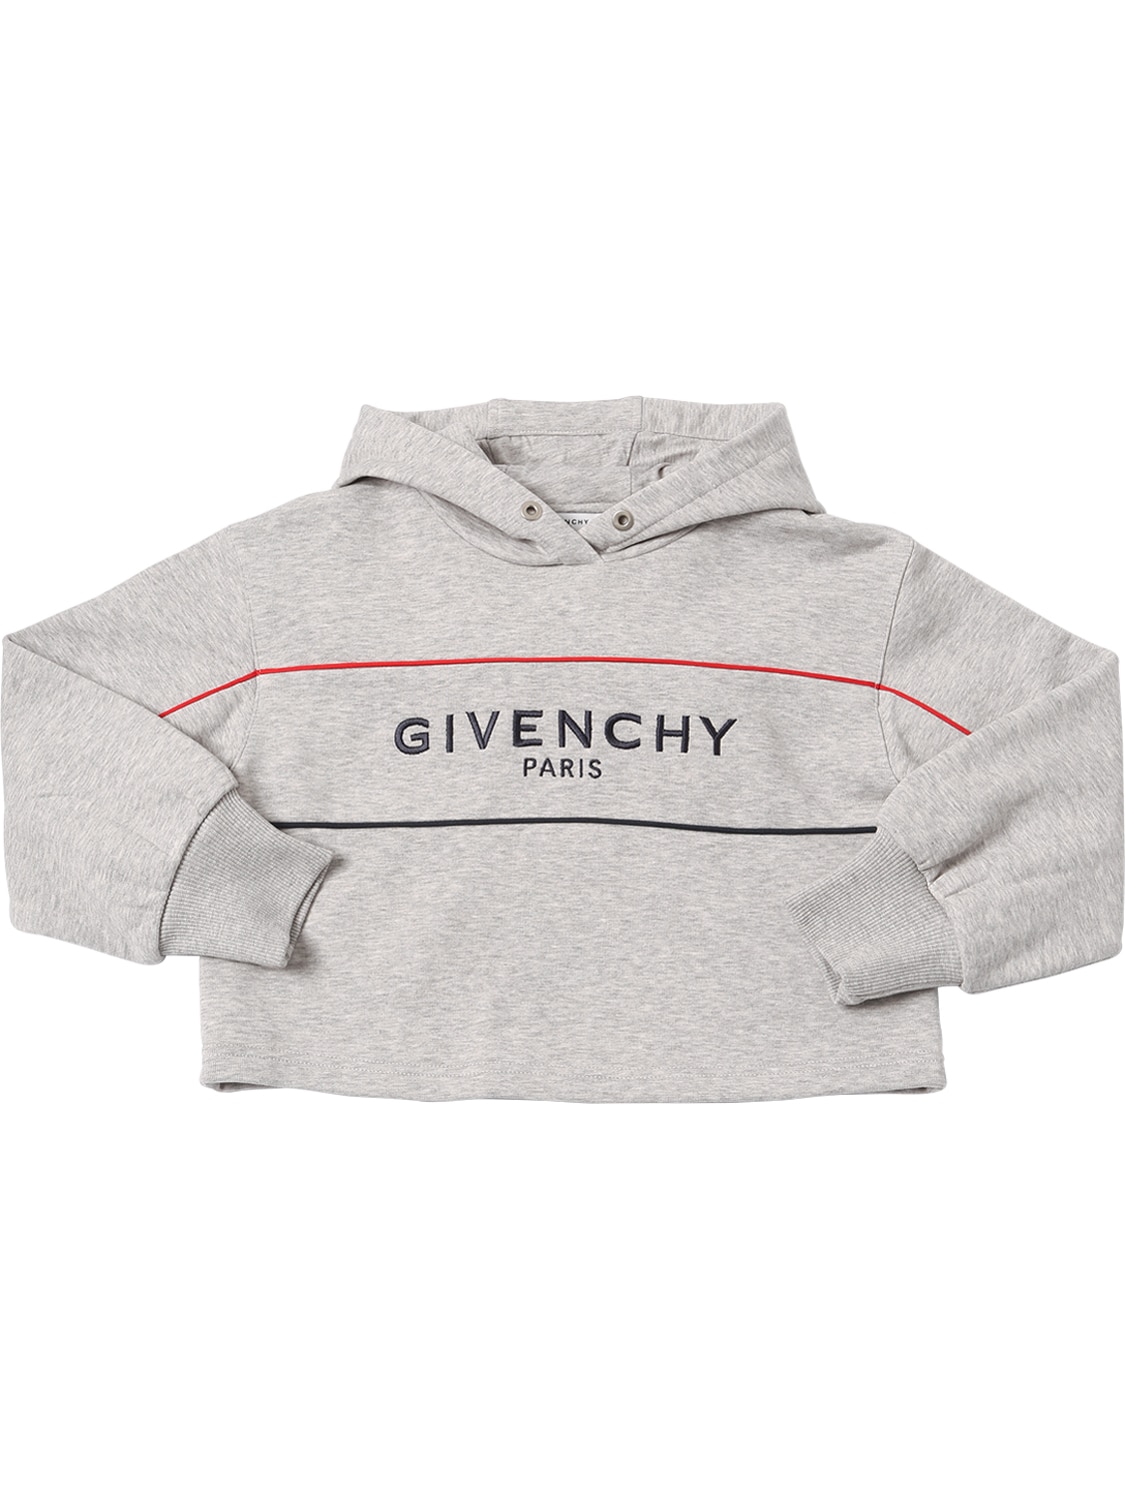 Givenchy Kids' Cropped Cotton Sweatshirt Hoodie In Grey